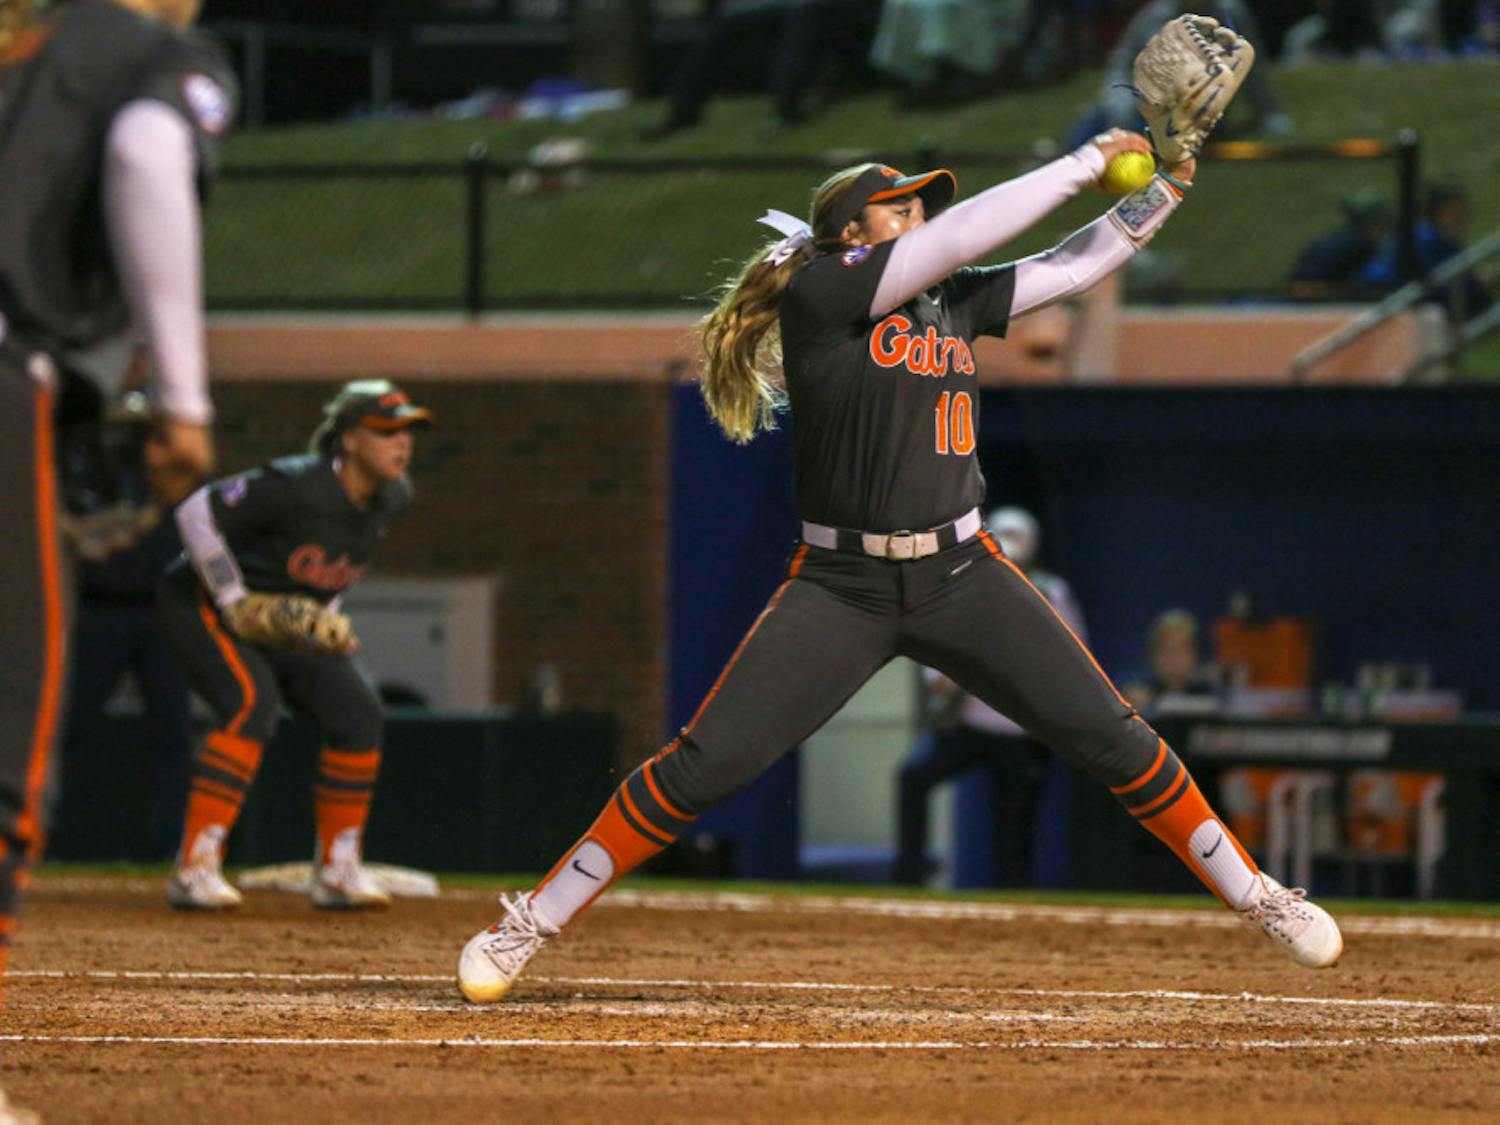 Florida pitcher Natalie Lugo is No. 6 in the NCAA in hits allowed per seven innings (2.26). She has allowed only seven hits and two walks this season.
&nbsp;